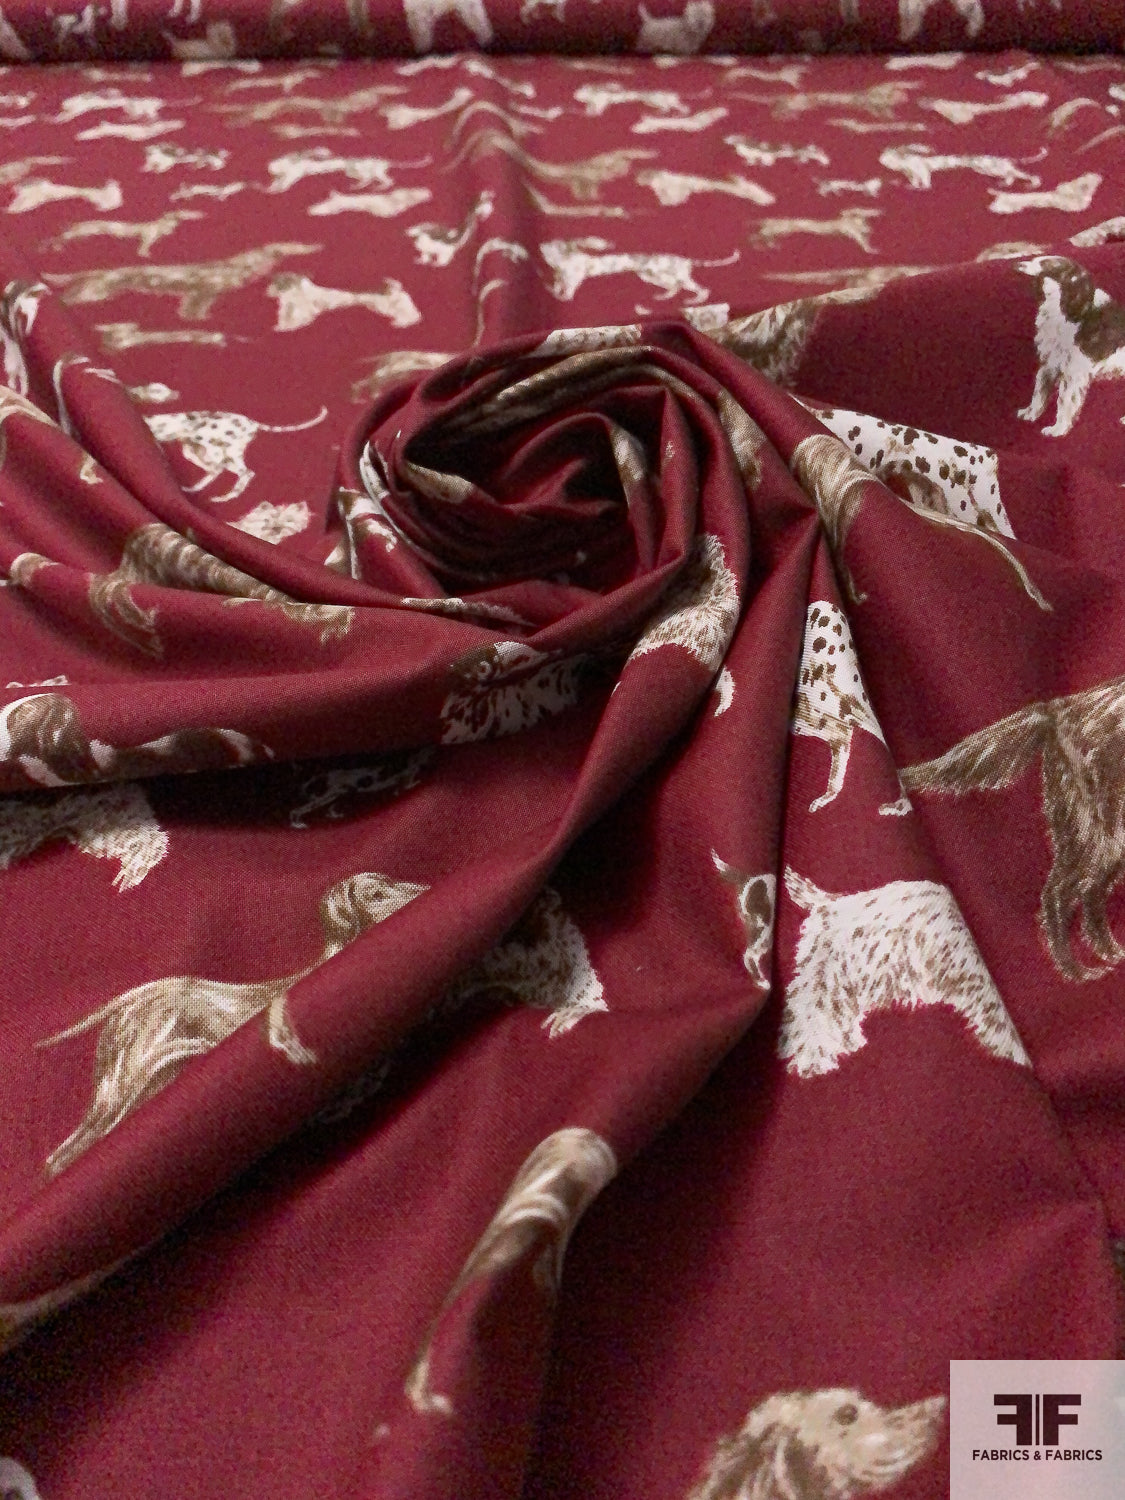 Dogs Printed Cotton Lawn - Maroon / Brown / Off-White